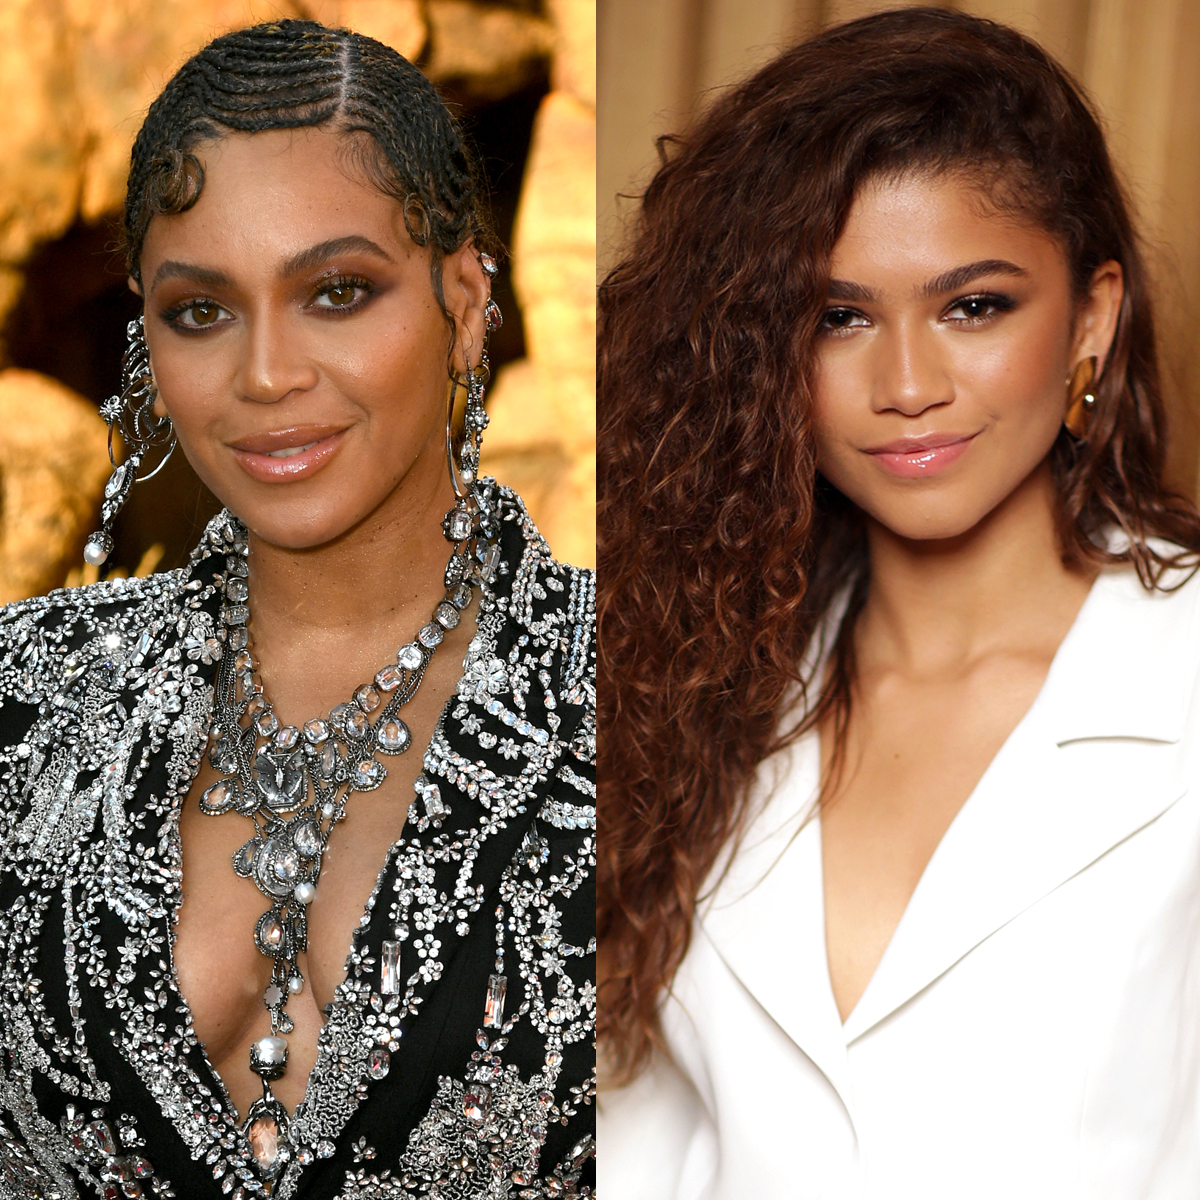 Beyoncé and Zendaya Have an Ultra Glam Moment in the Front Row at